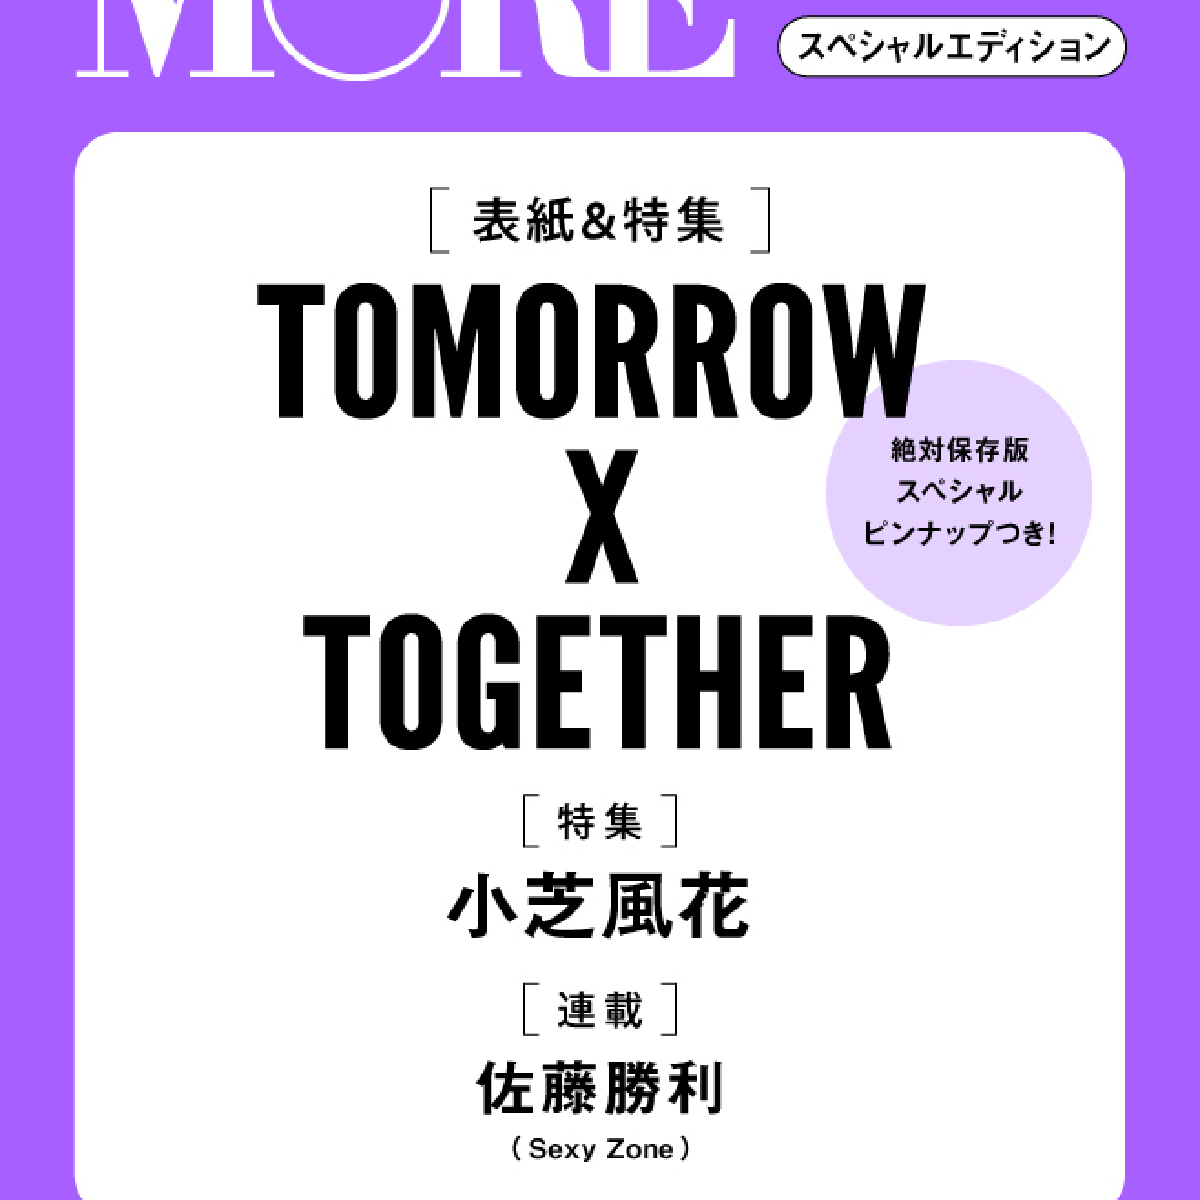 【To TOMORROW X TOGETHER fans！】We now offer shipping to customers in overseas! ＜MORE August issue, TOMORROW X TOGETHER on cover  ＞　